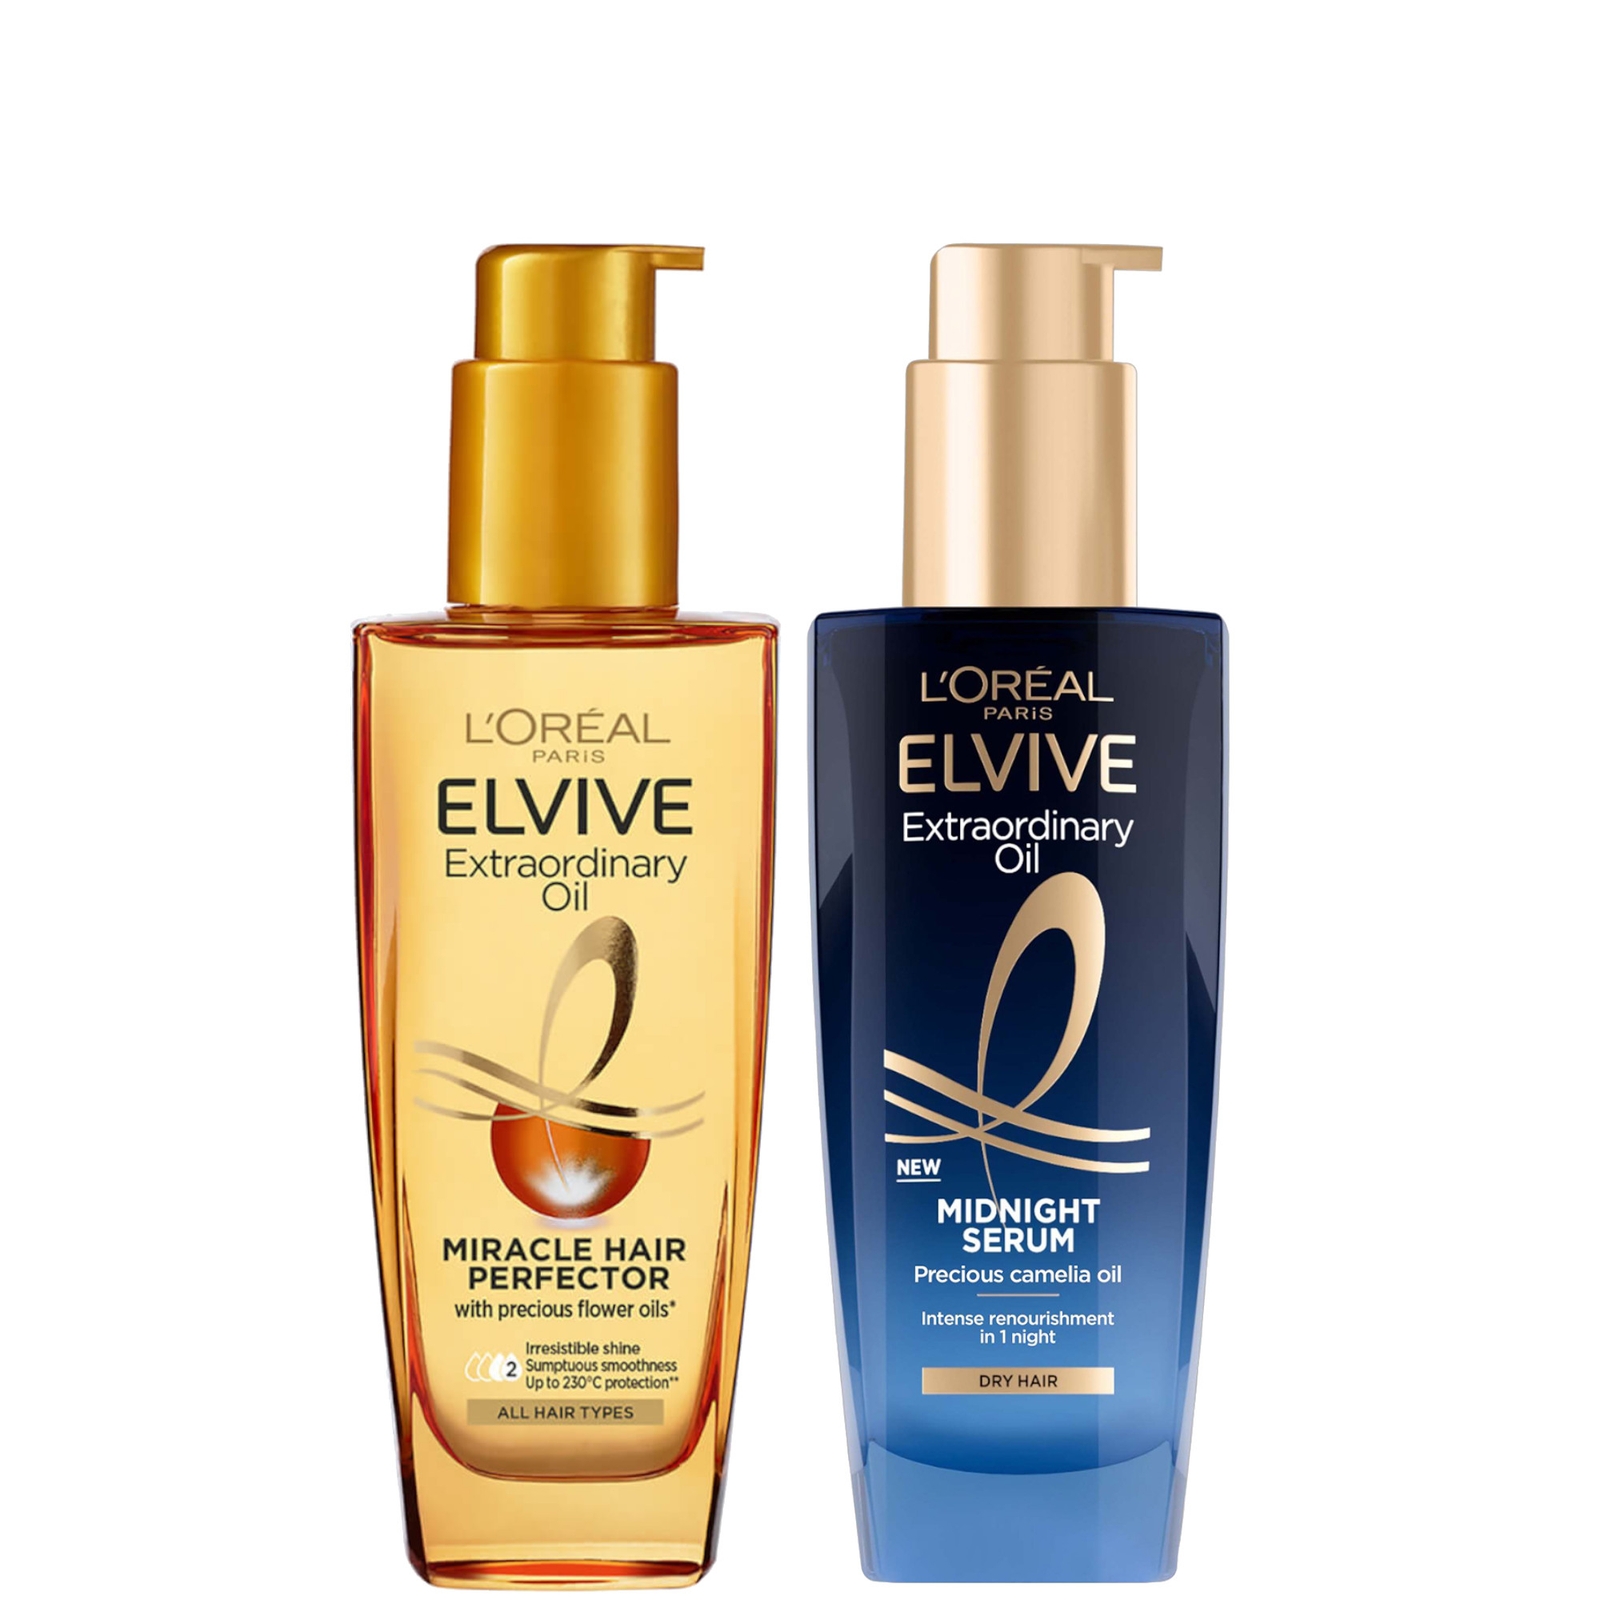 L'Oreal Paris Elvive Extraordinary Oil Nourished Hair Treatment Day and Night Routine Set for Dry Ha